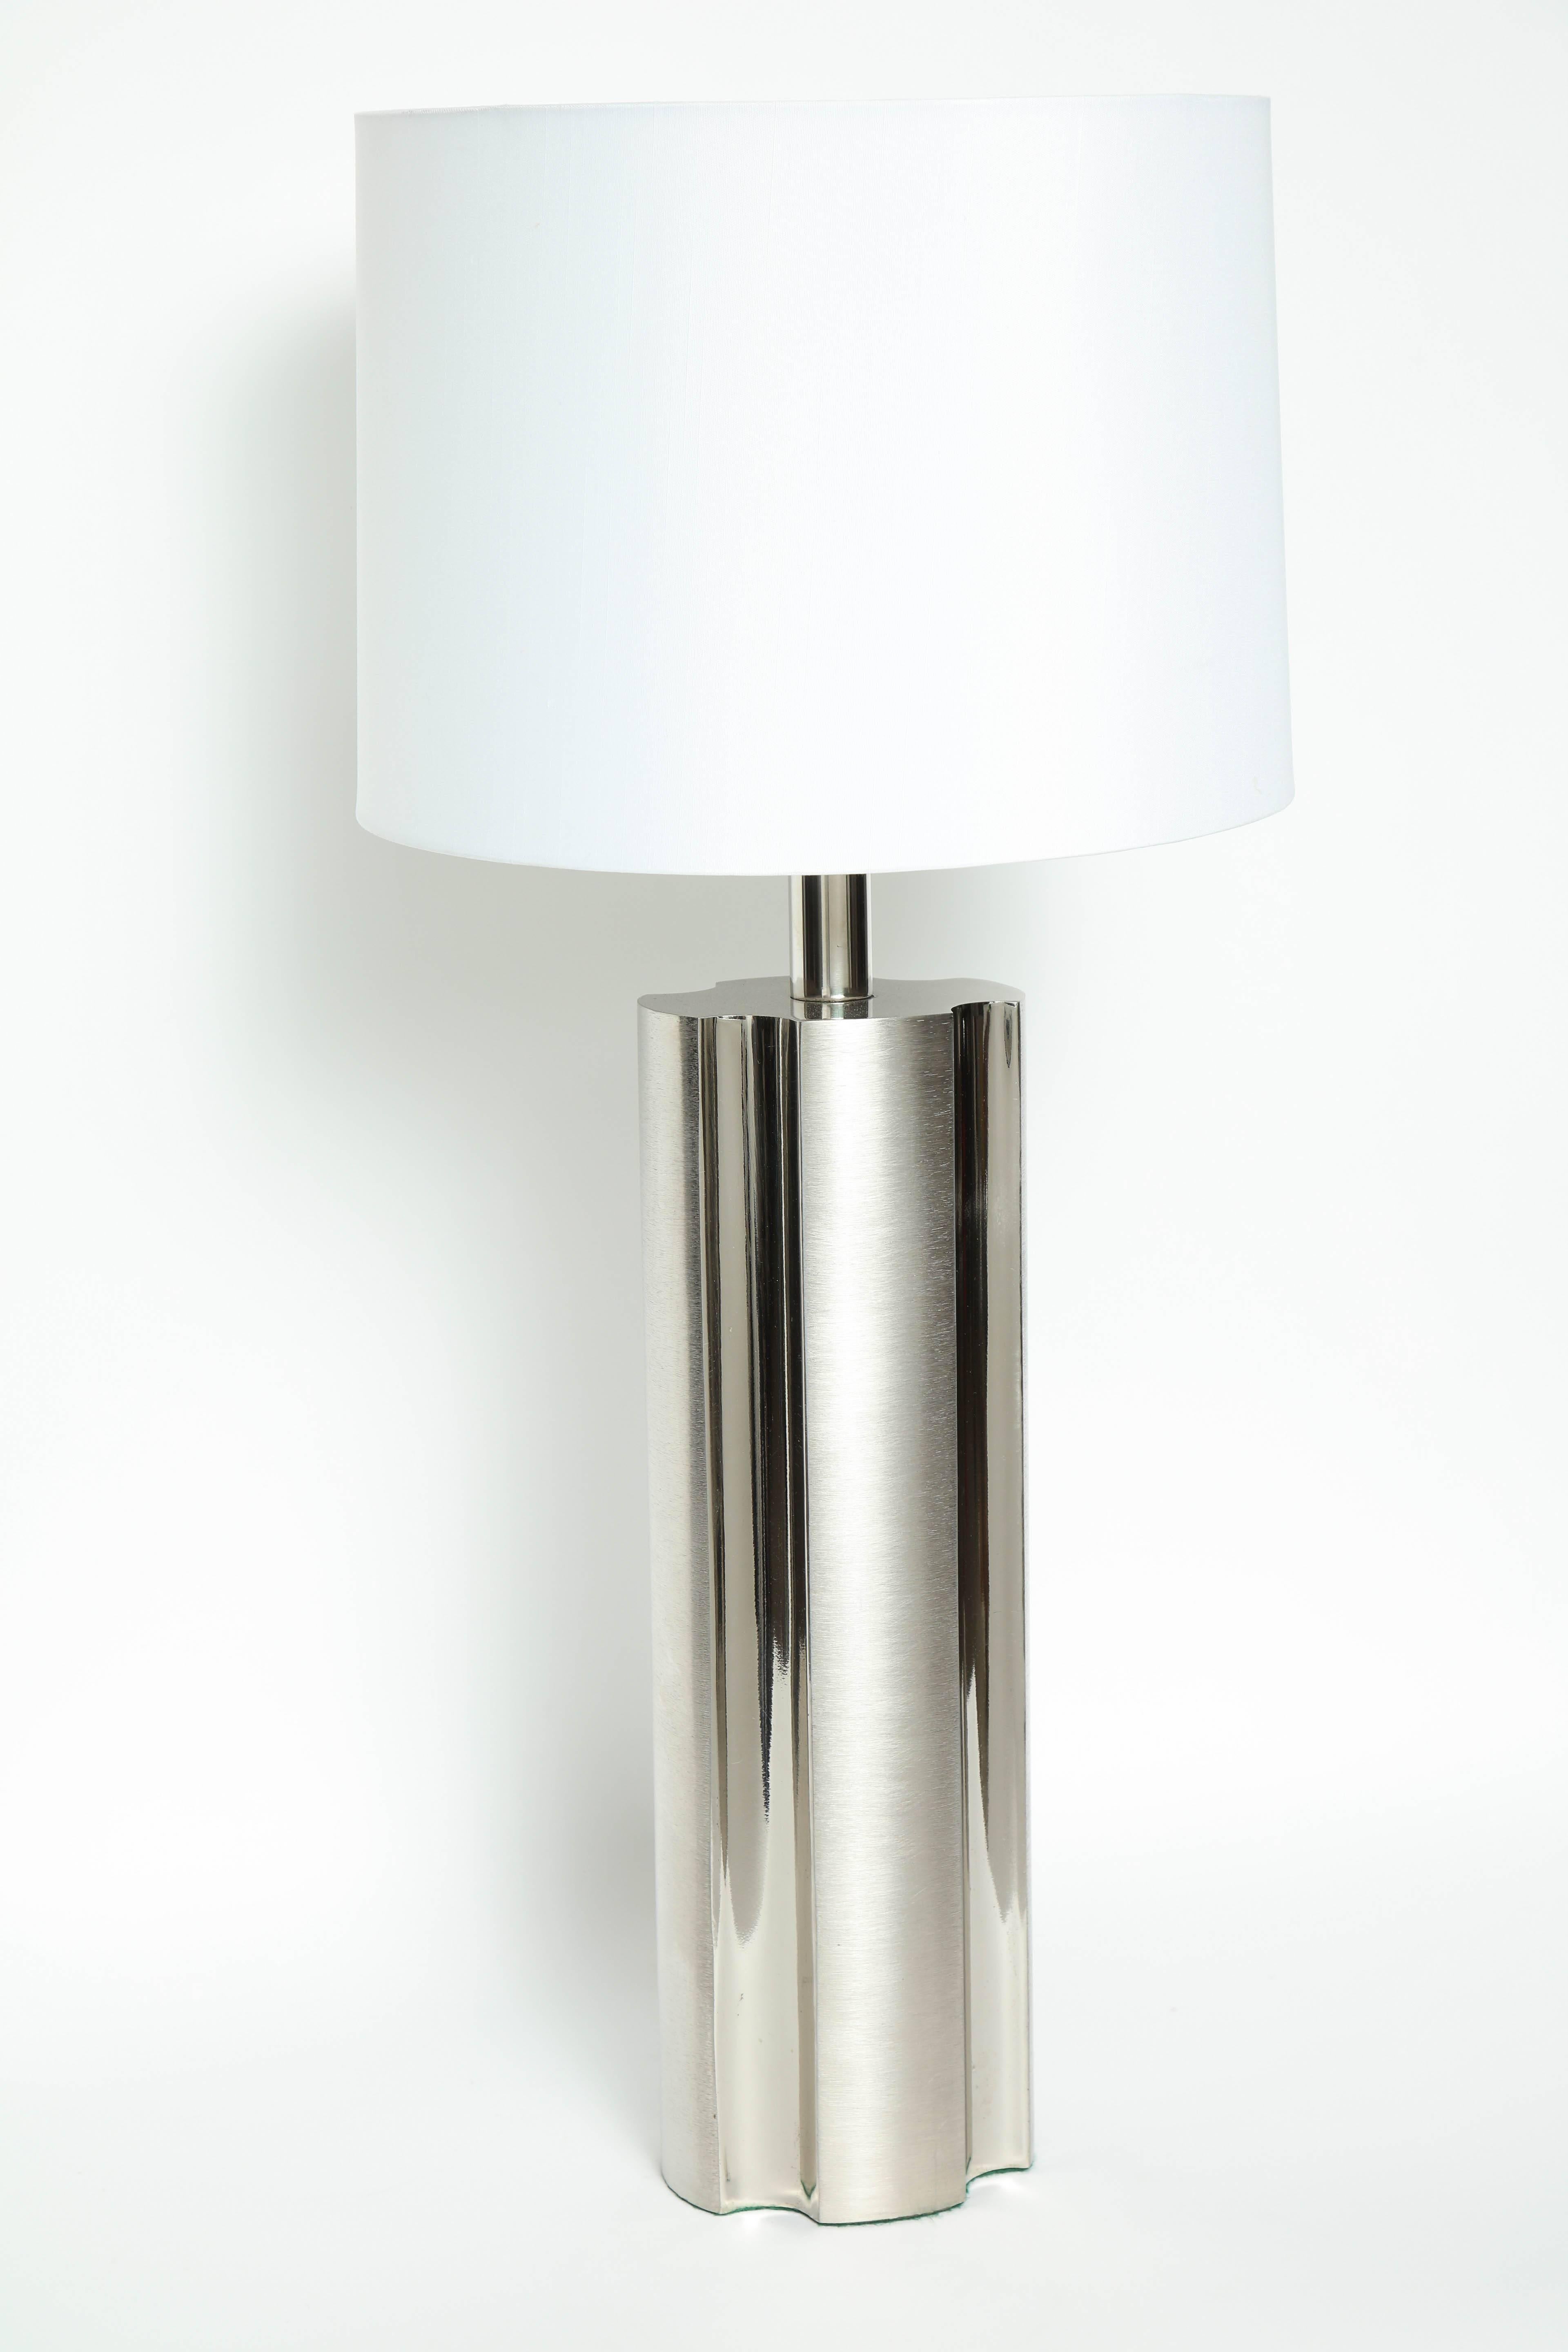 Pair of modernist fluted brushed steel column lamps with contrasting polished steel indentations. Lamps have been rewired for use in the USA with clear cords and nickel sockets. Shades not included.